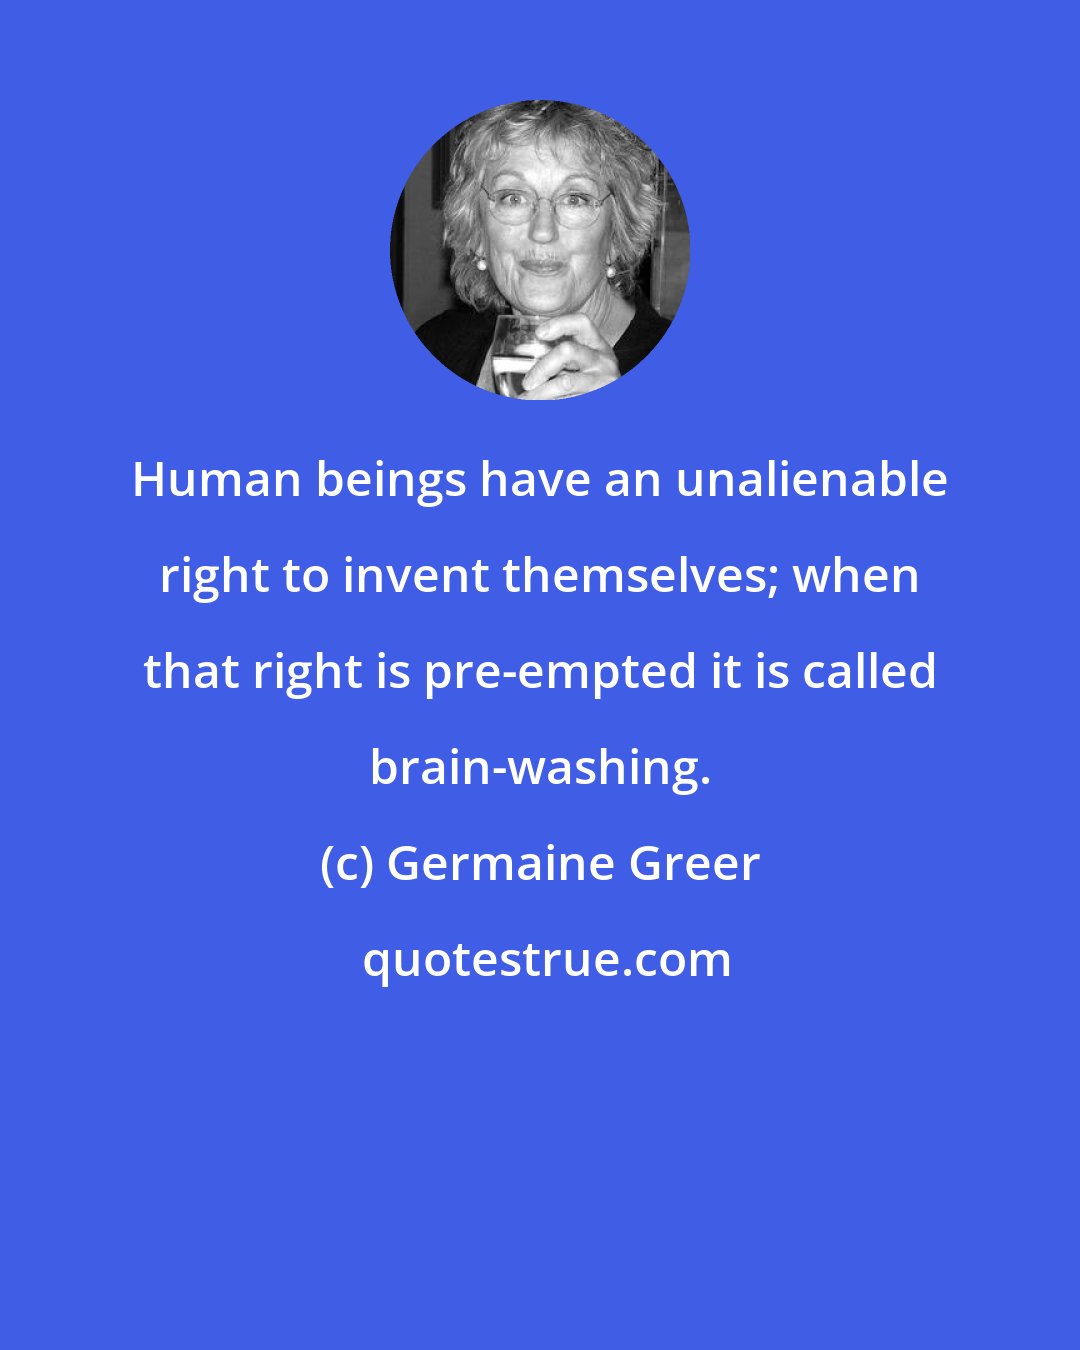 Germaine Greer: Human beings have an unalienable right to invent themselves; when that right is pre-empted it is called brain-washing.